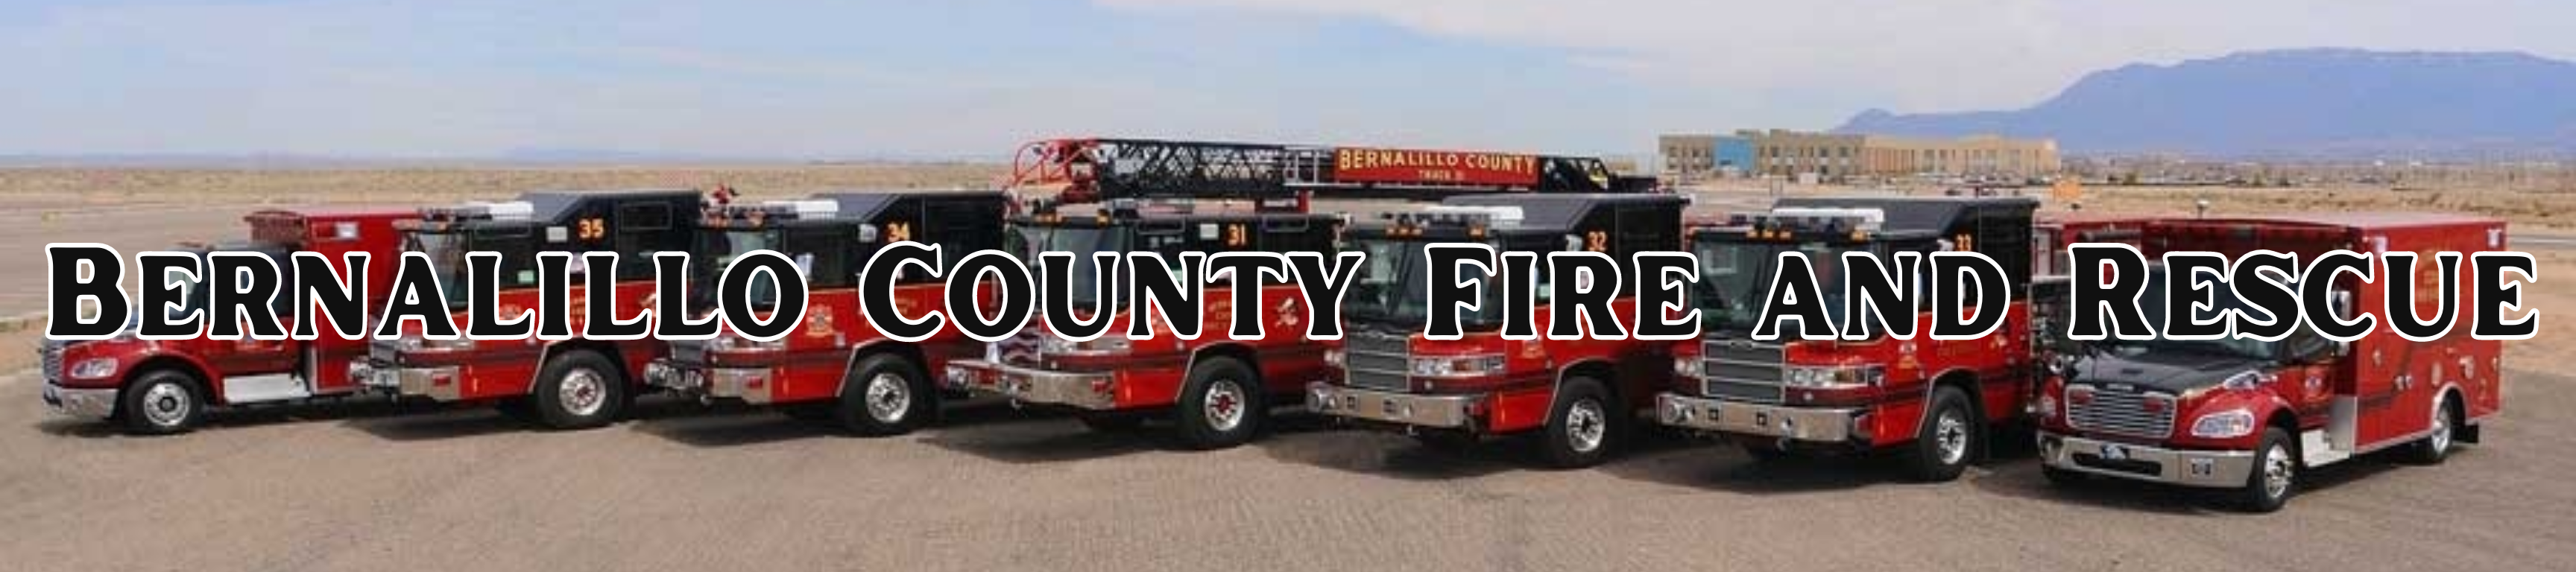 https://bernalillocountyfirerescue.com/userfiles/media/default/bernalillo-county-fire-and-rescue.png